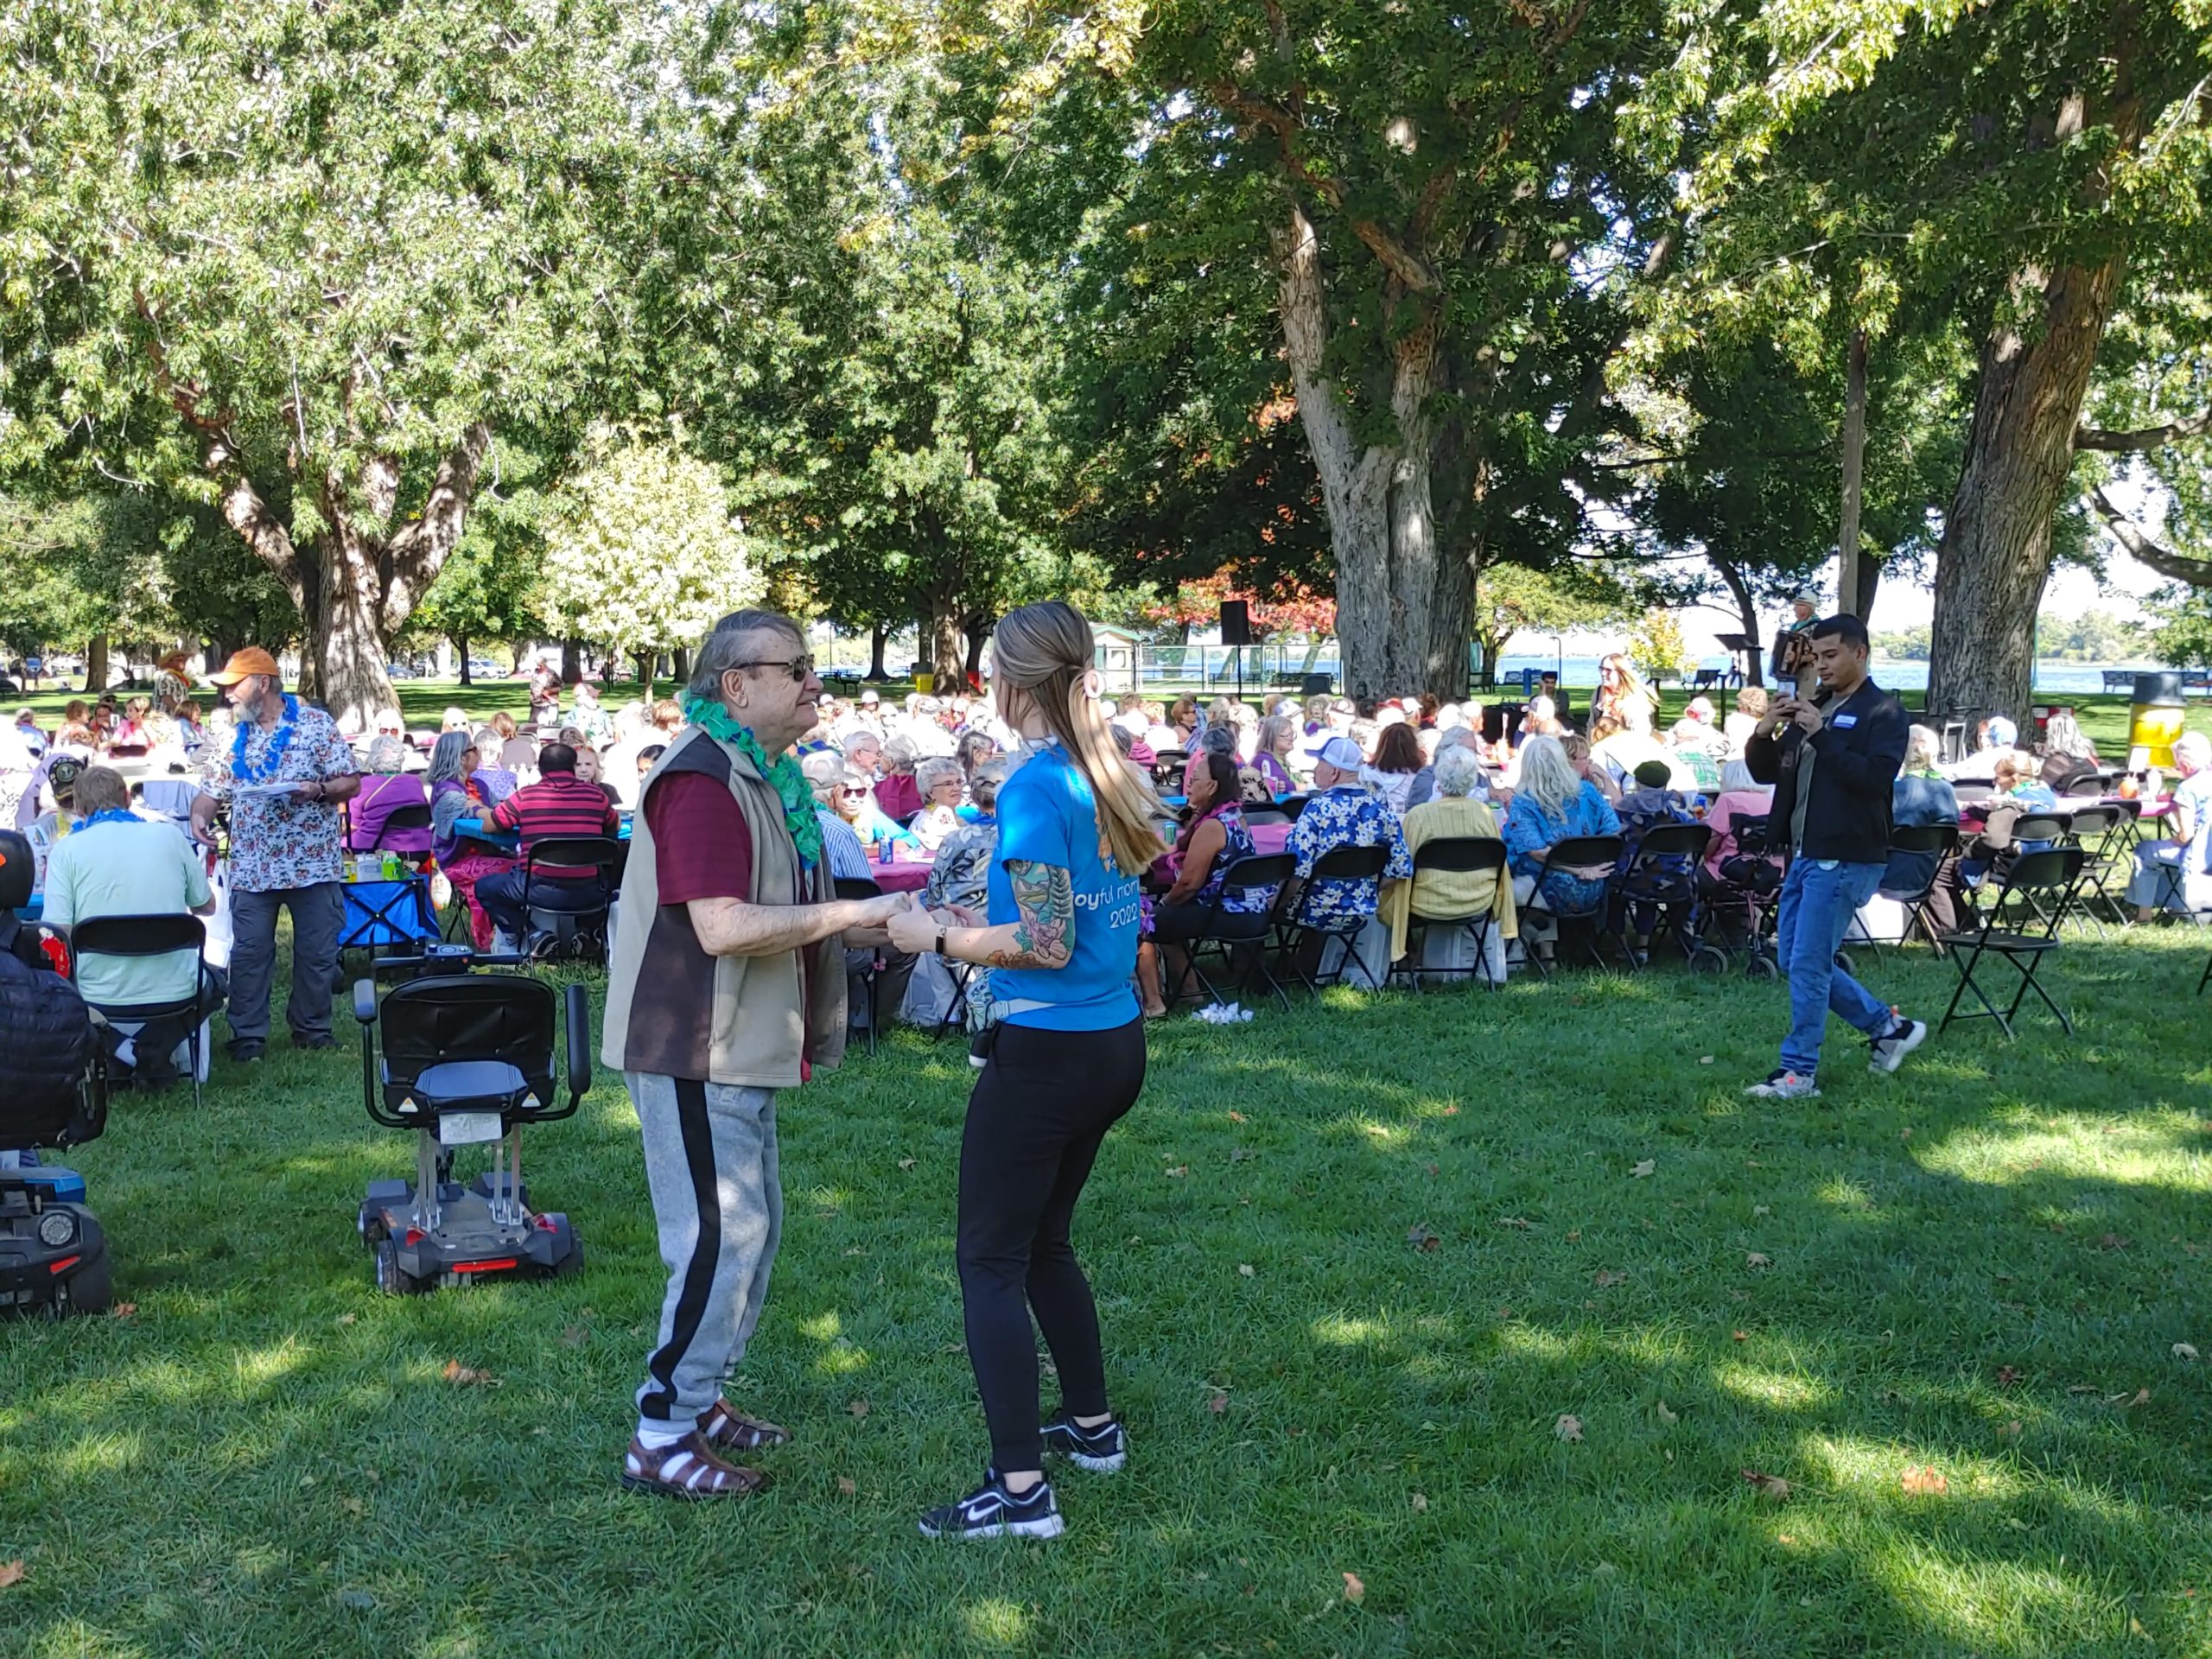 Lenny Ross, 73, of Richland, dances with Ciera Huie, a staff member at Kennewick’s Columbia Crossing of Grandridge, while an accordion player performed at the 2022 All Senior Picnic, held Sept. 29 at Howard Amon Park in Richland. (Photo by Wendy Culverwell)